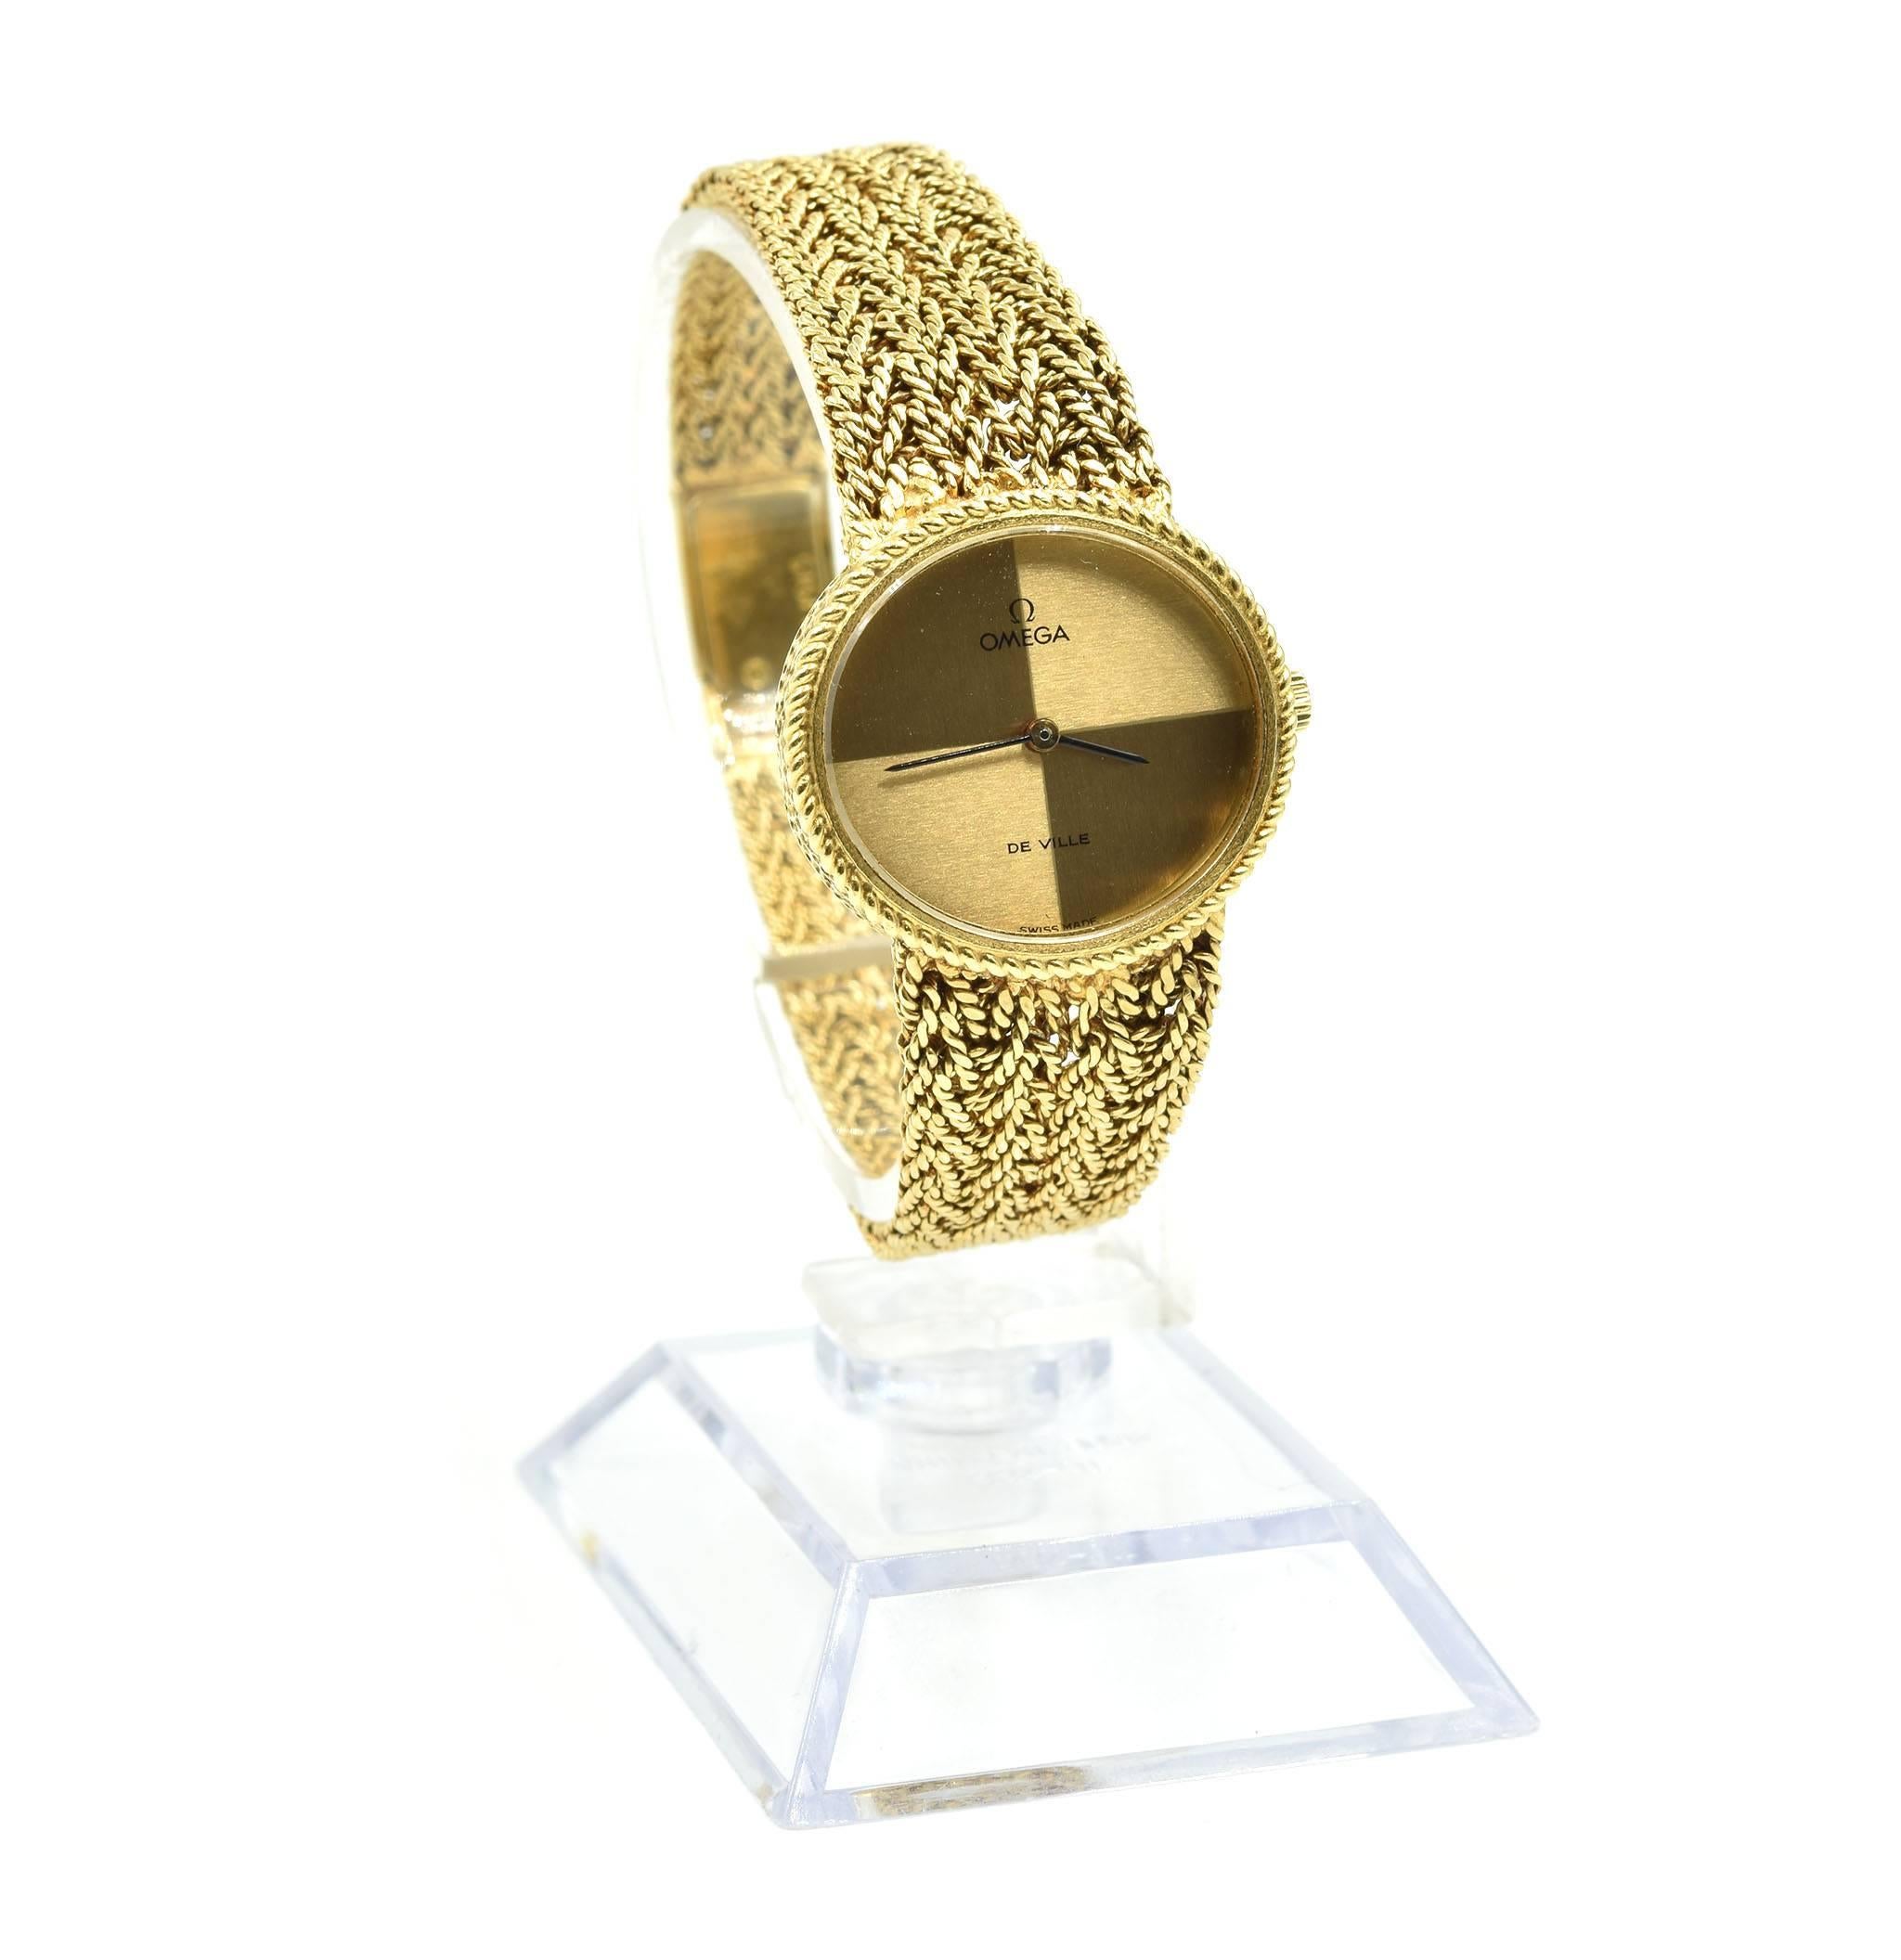 Movement: manual wind
Function: hours, minutes
Case: oval 25.50mm x 23.50mm 18k yellow gold case, plastic crystal, 18k yellow gold cable bezel, solid case back
Band: 18k yellow gold mesh bracelet with jewelry clasp
Dial: champagne dial with black